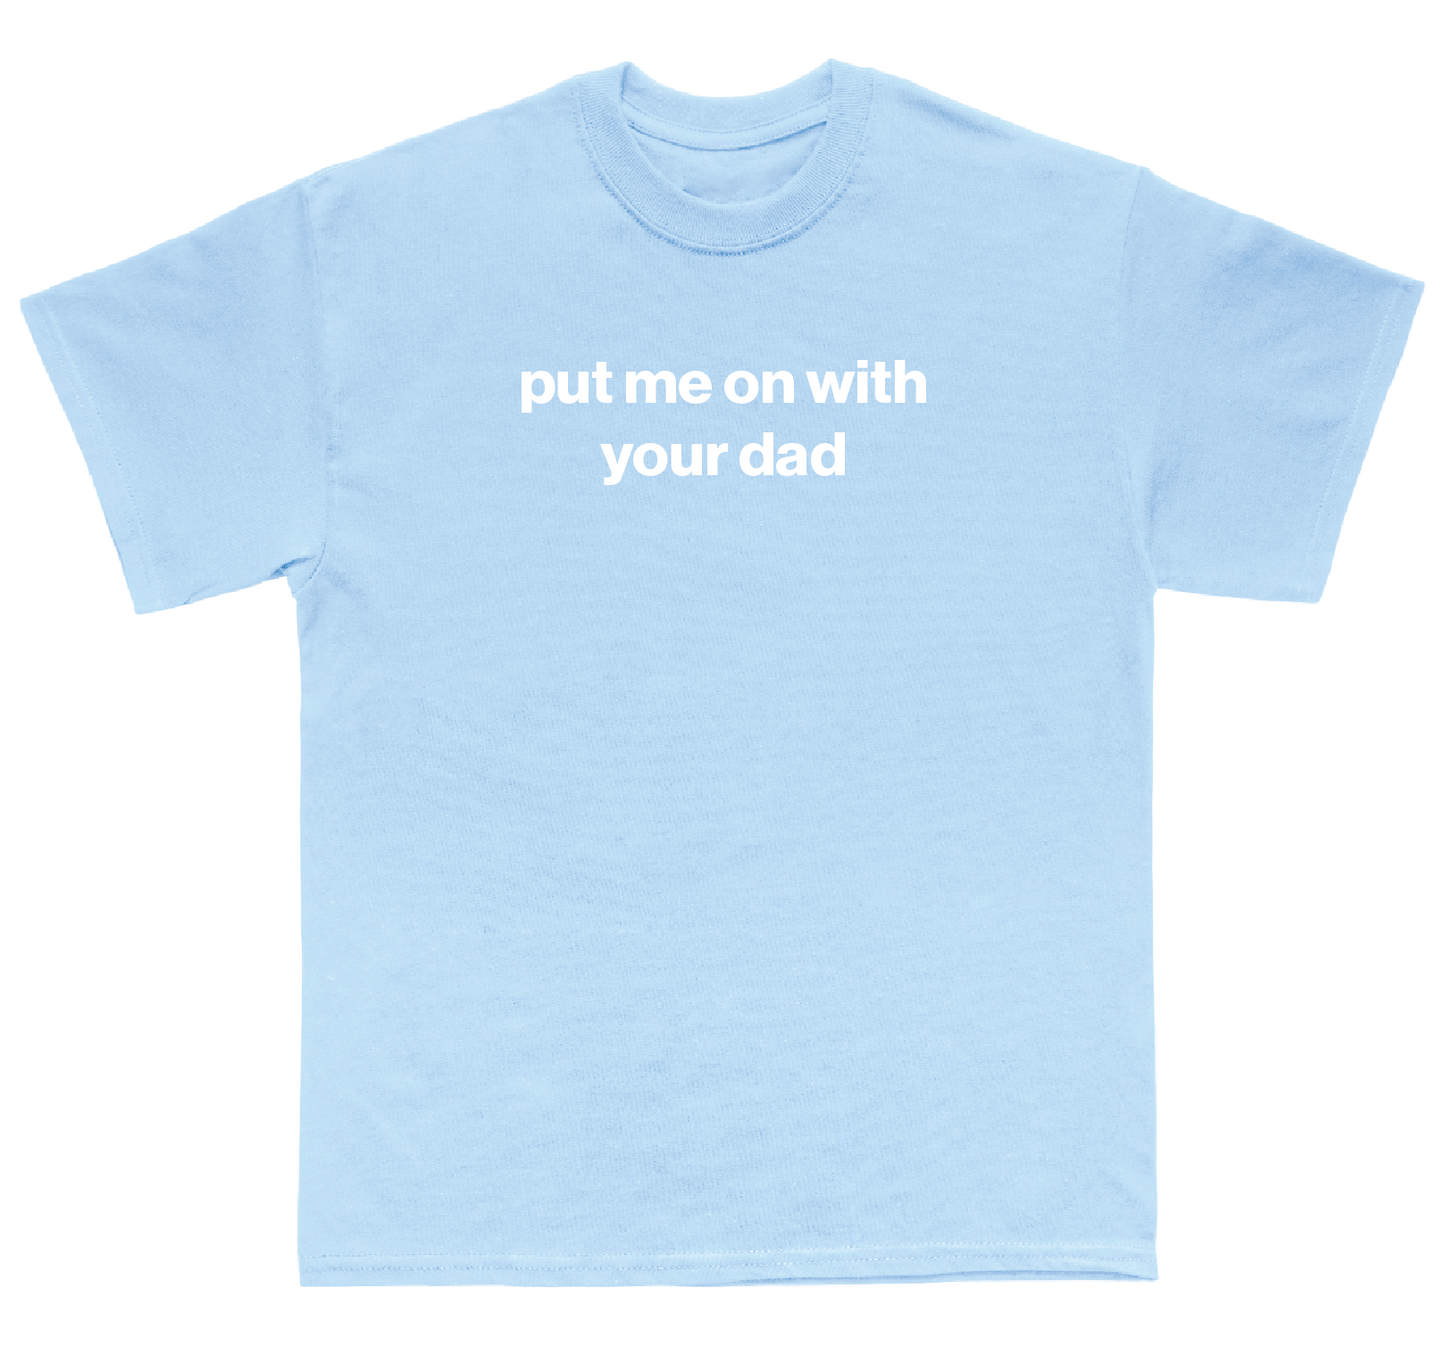 put me on with your dad shirt